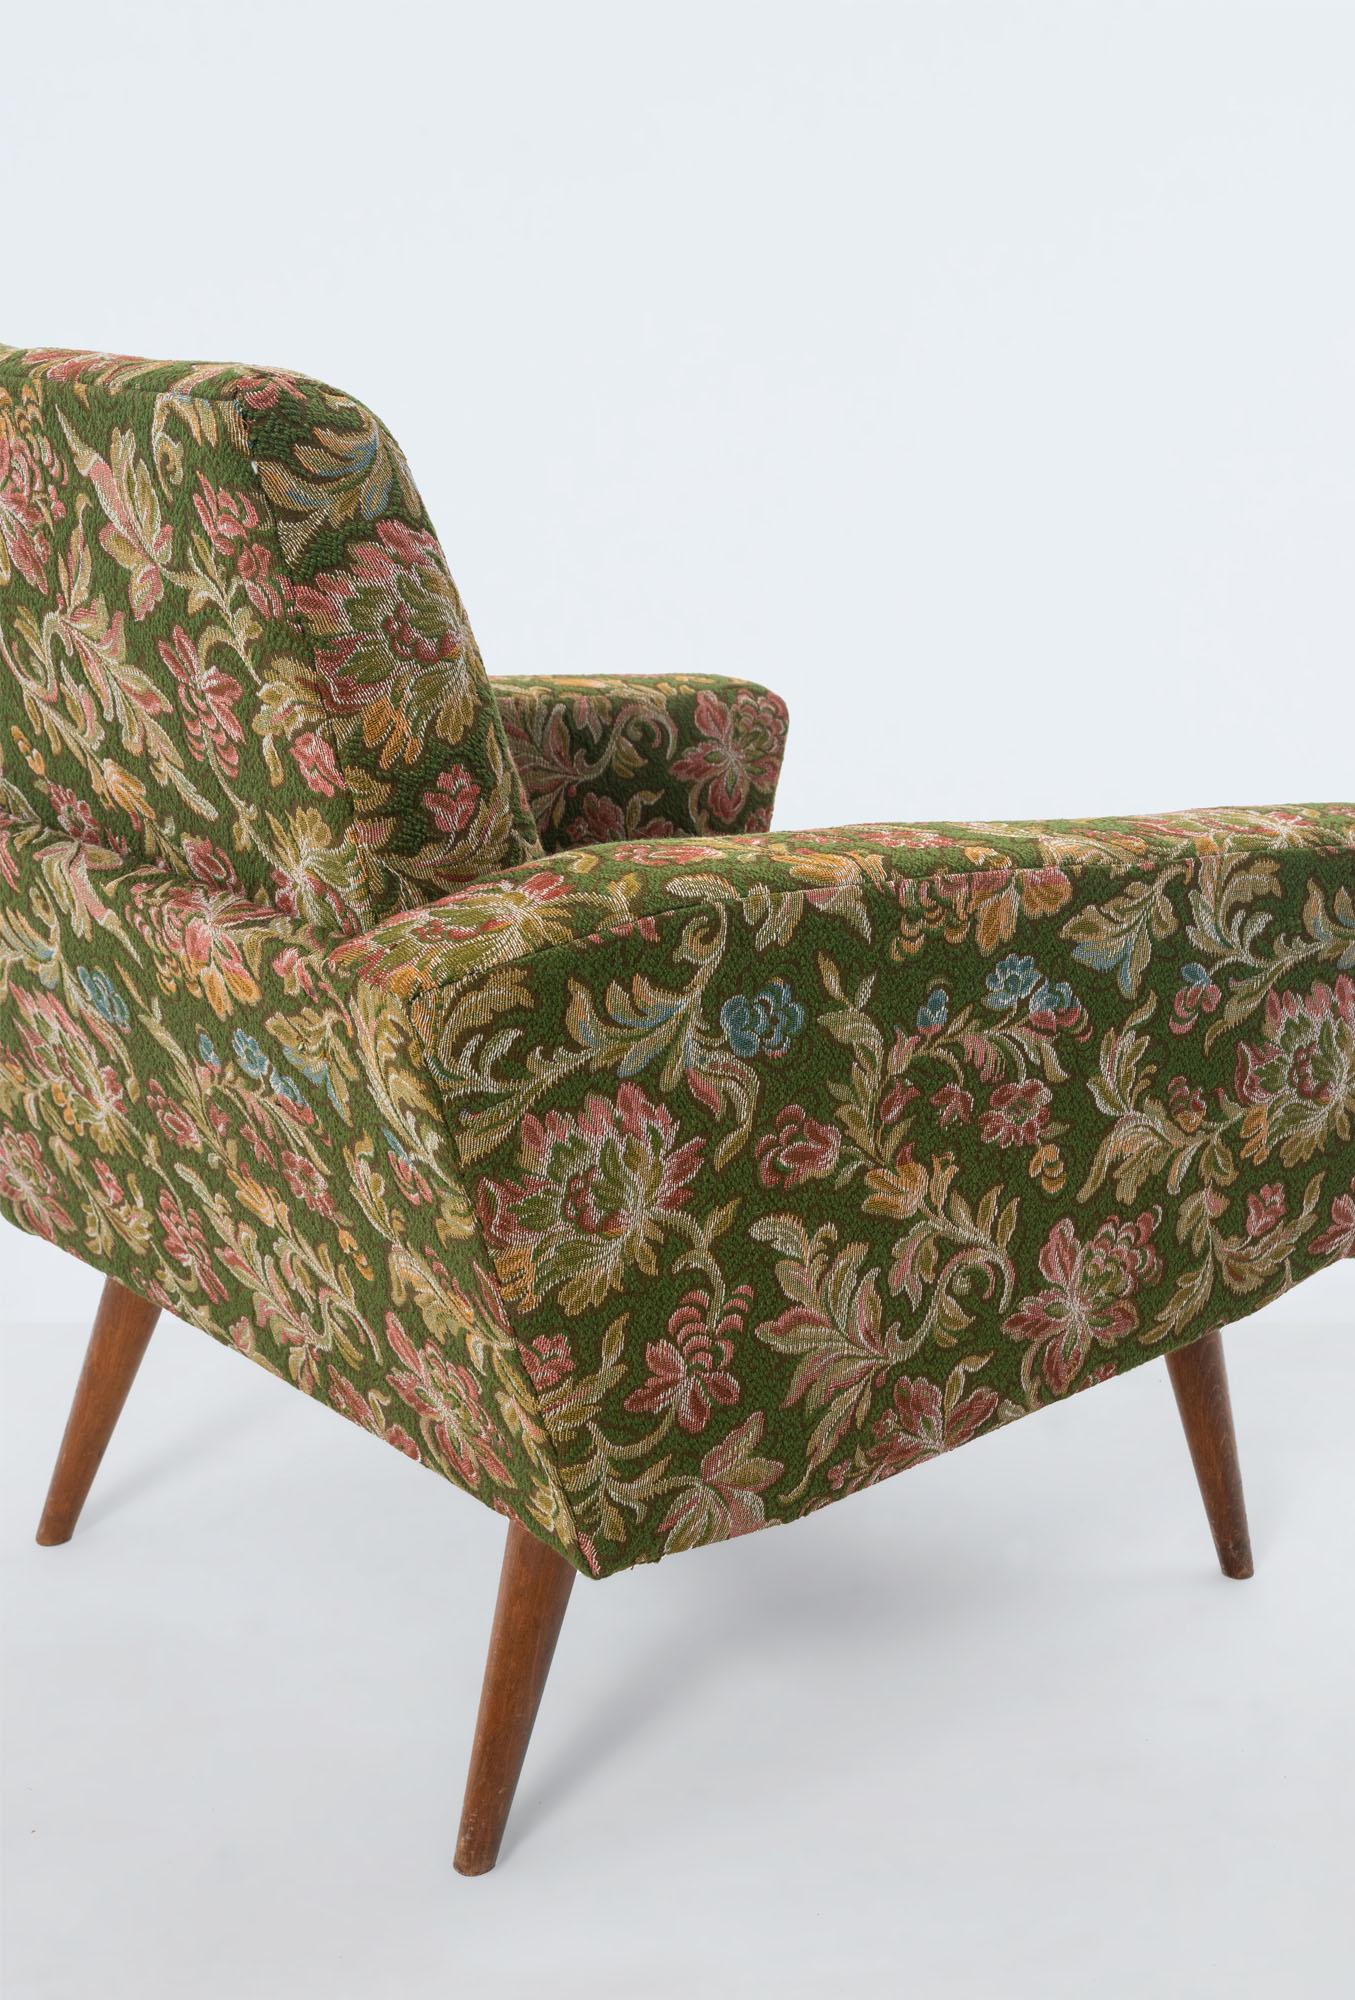 Set of Lounge Chairs in Green Floral Upholstery In Good Condition For Sale In Tarnowskie Gory, Sląskie